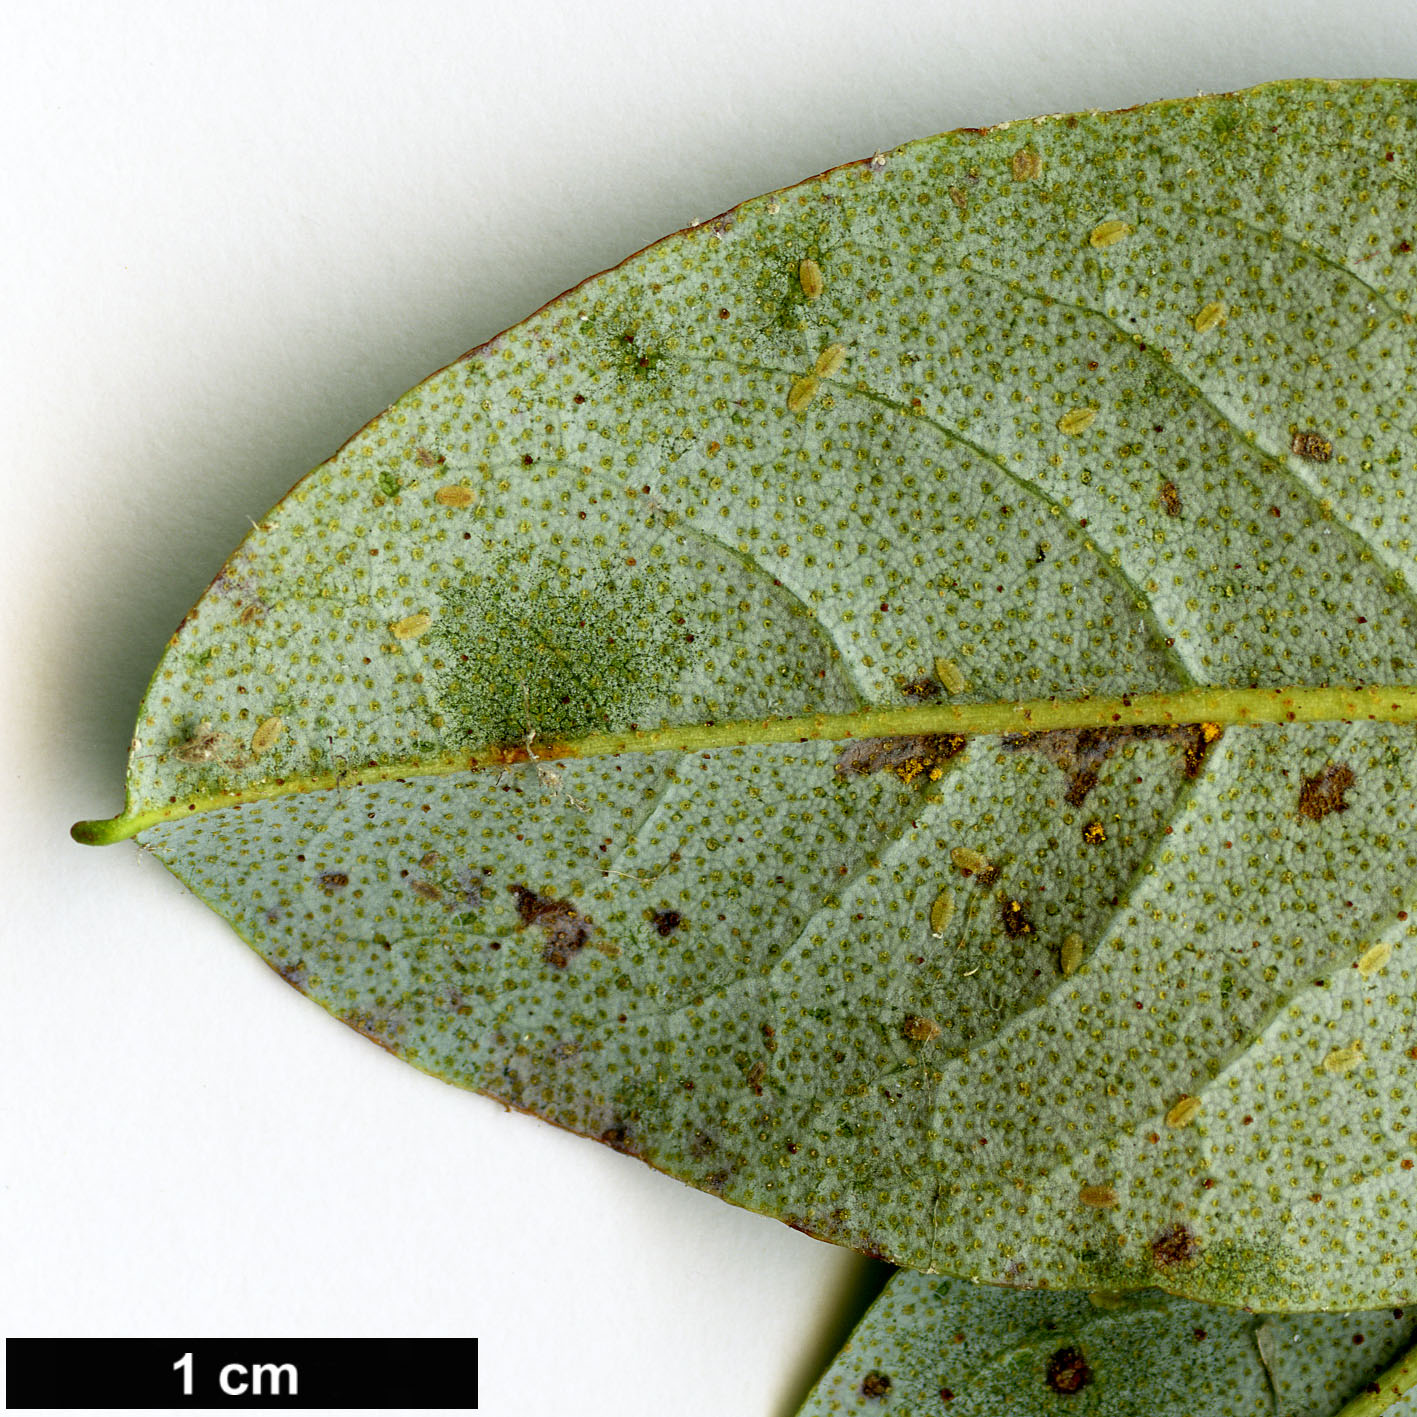 High resolution image: Family: Ericaceae - Genus: Rhododendron - Taxon: charitopes - SpeciesSub: subsp. charitopes